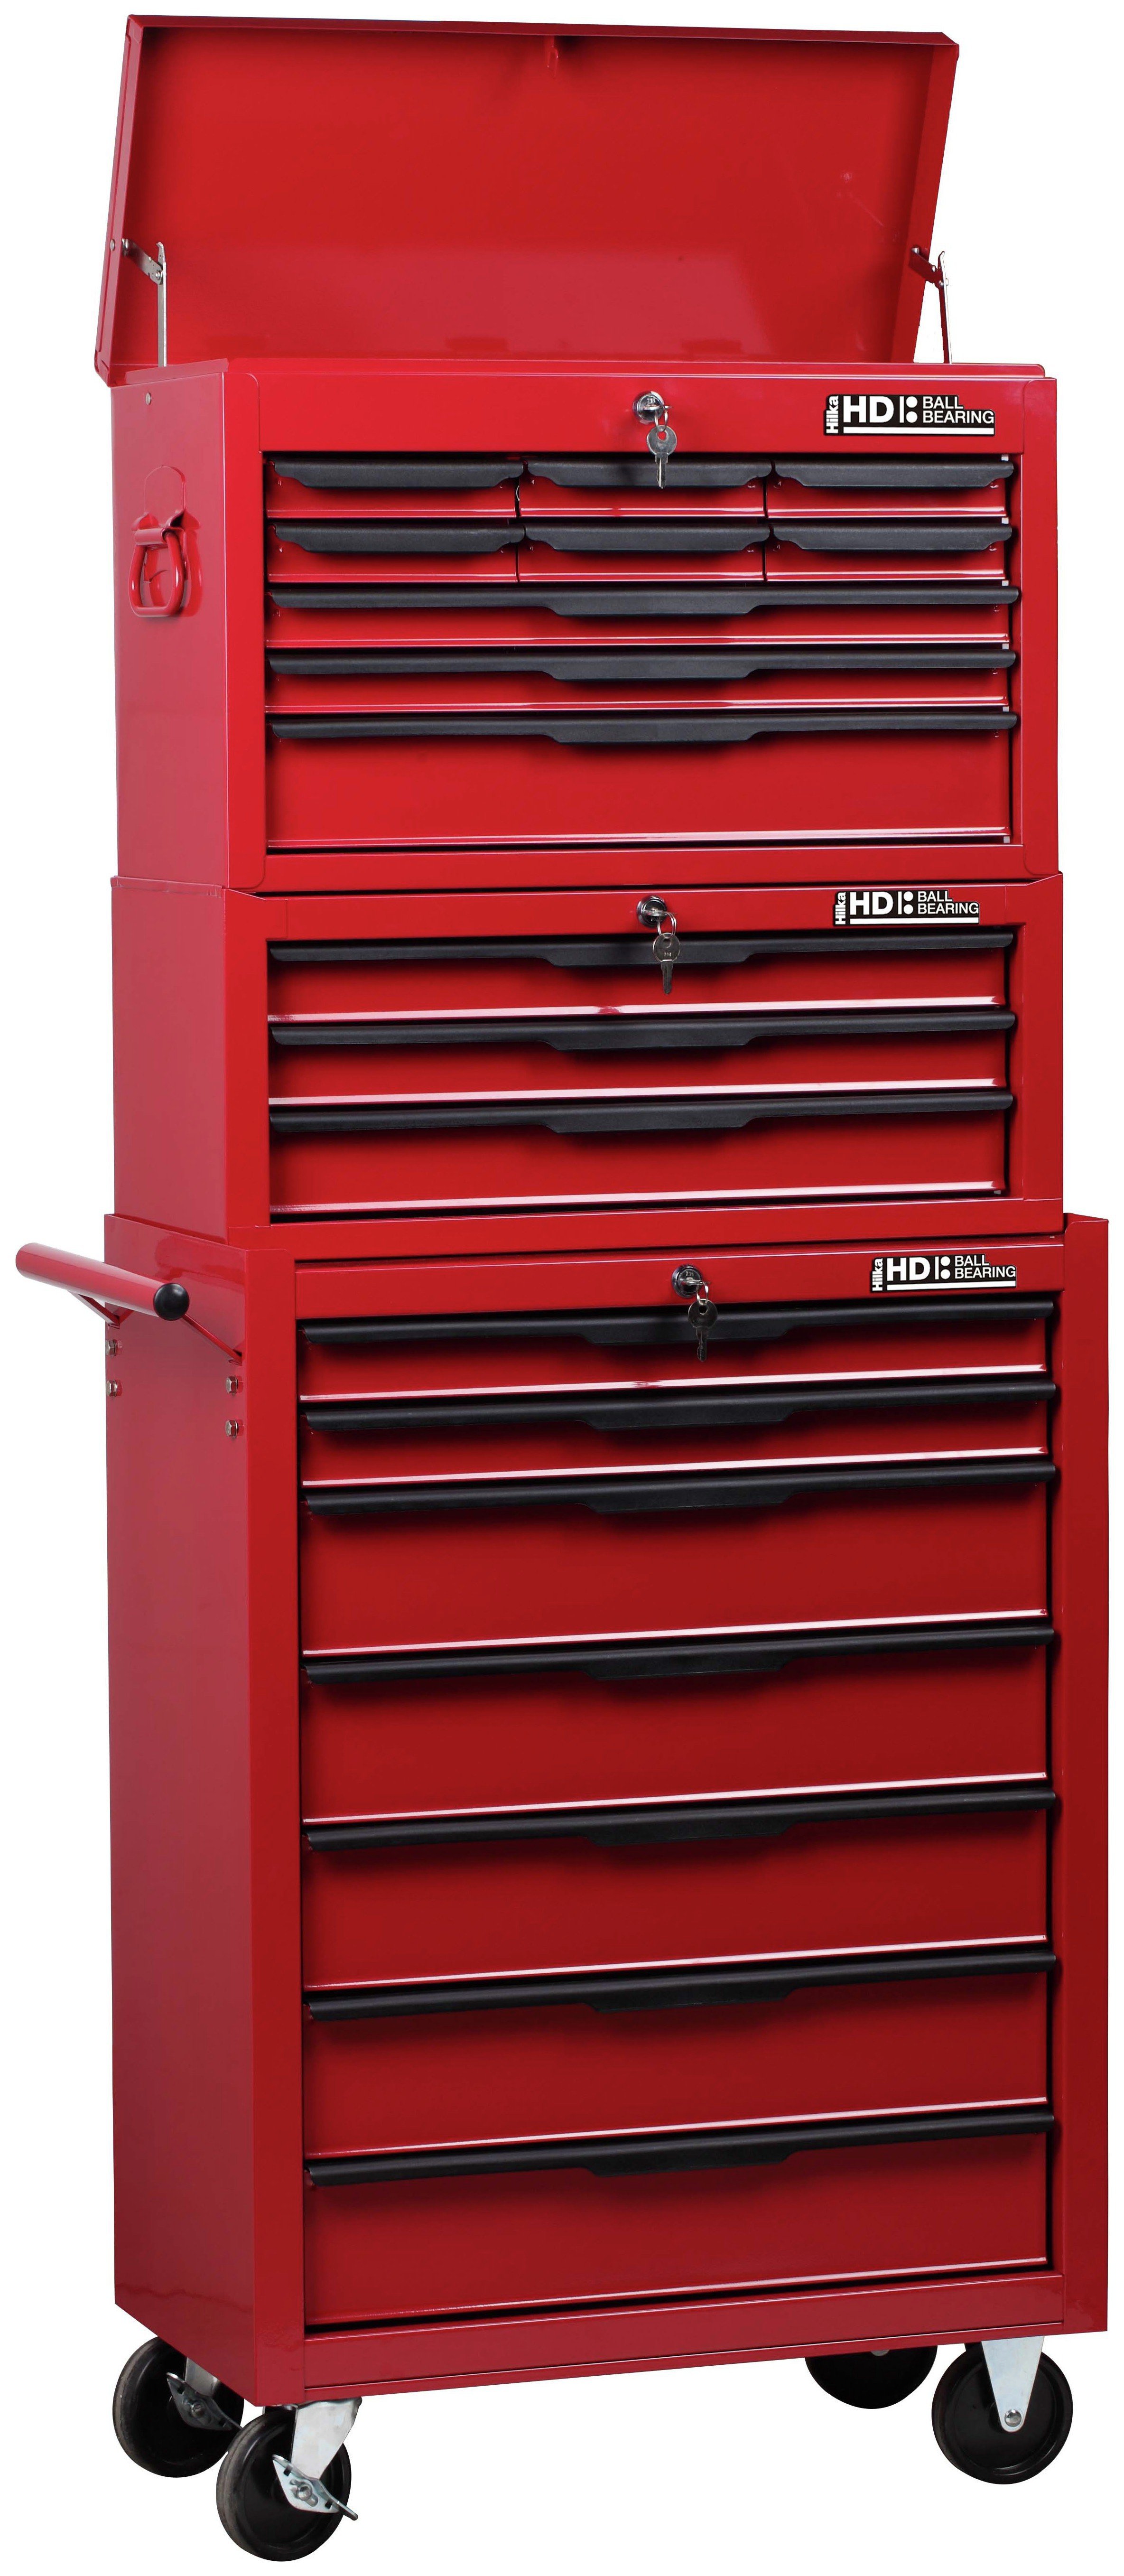 Hilka 19 Drawer Combination Tool Cabinet.